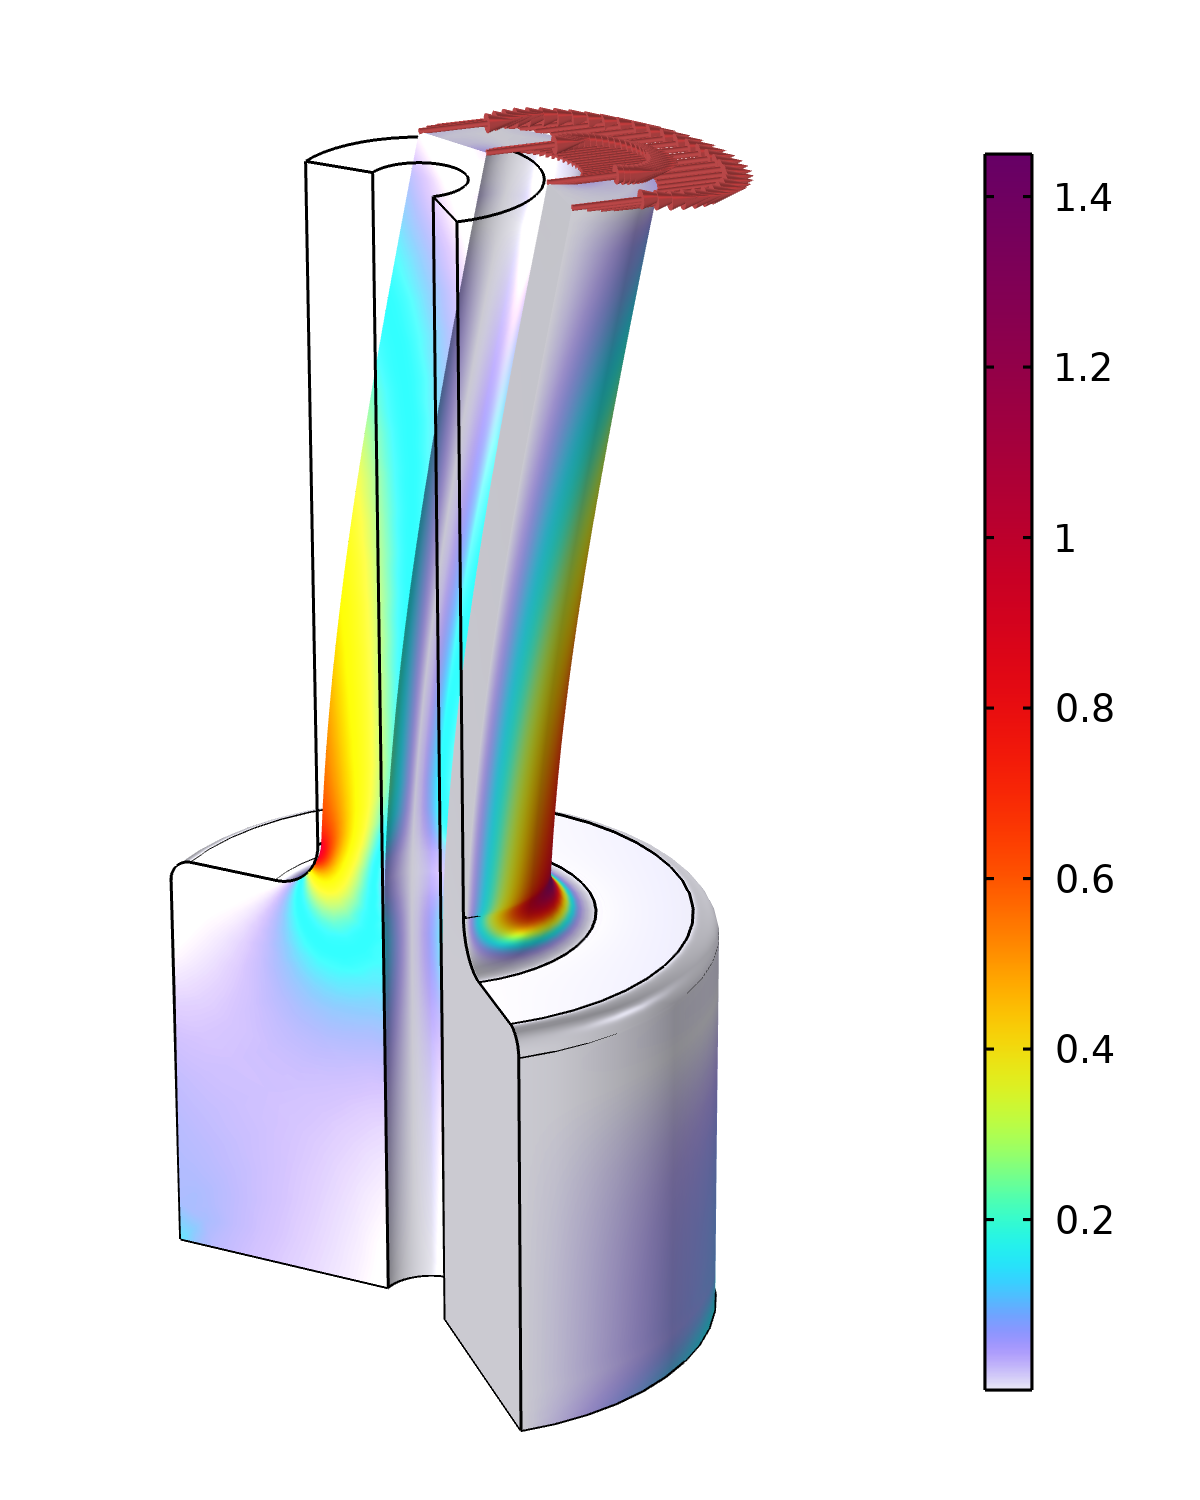 A model of a 2D axisymmetric, hollow shaft subjected to bending forces.